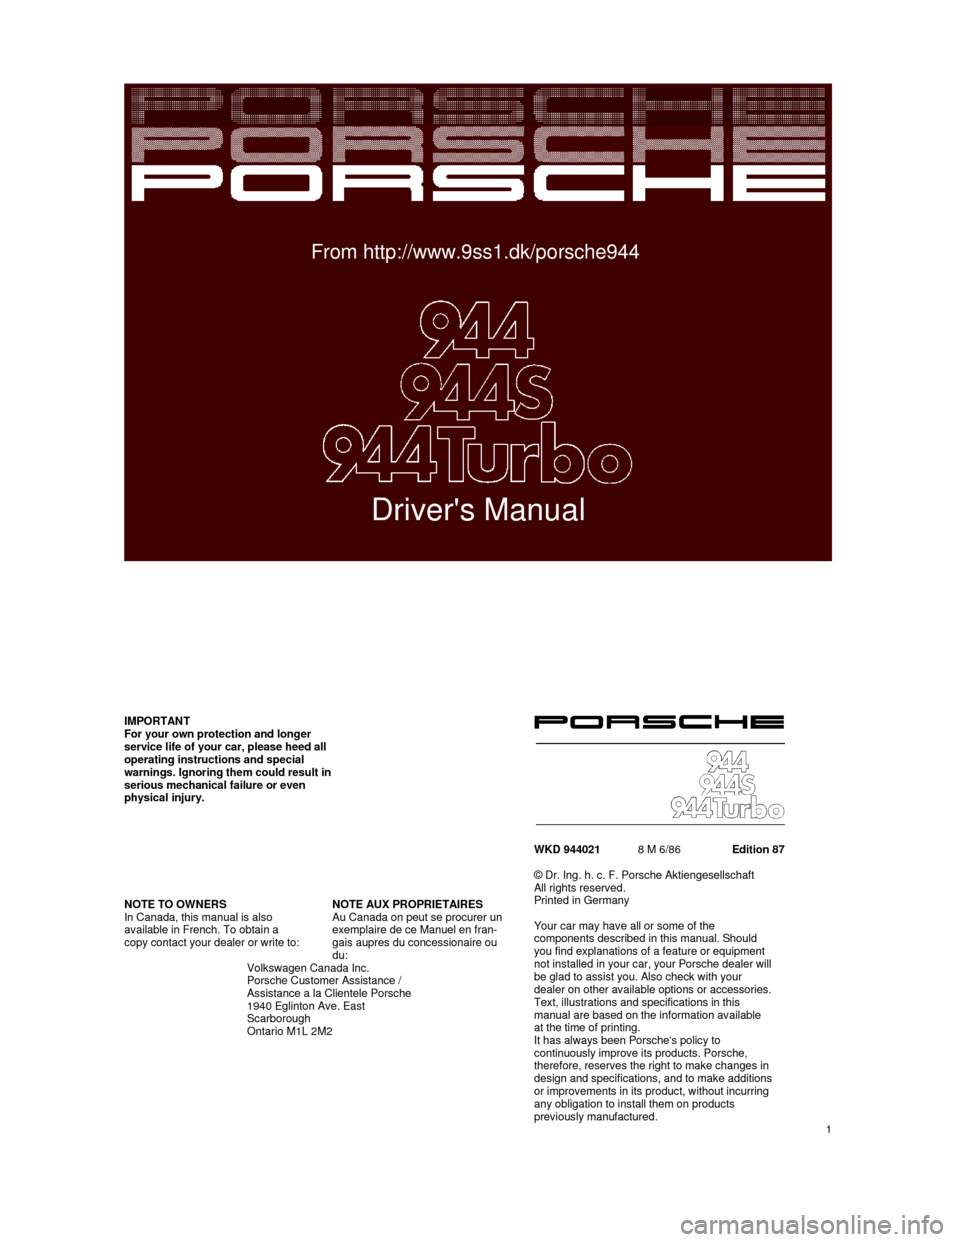 PORSCHE 944 1987 1.G Owners Manual  
 
  
From http://www.9ss1.dk/porsche944  
 
 
Drivers Manual 
    
   
IMPORTANT For your own protection and longer  
service life of your car, please heed all  
operating instructions and special 